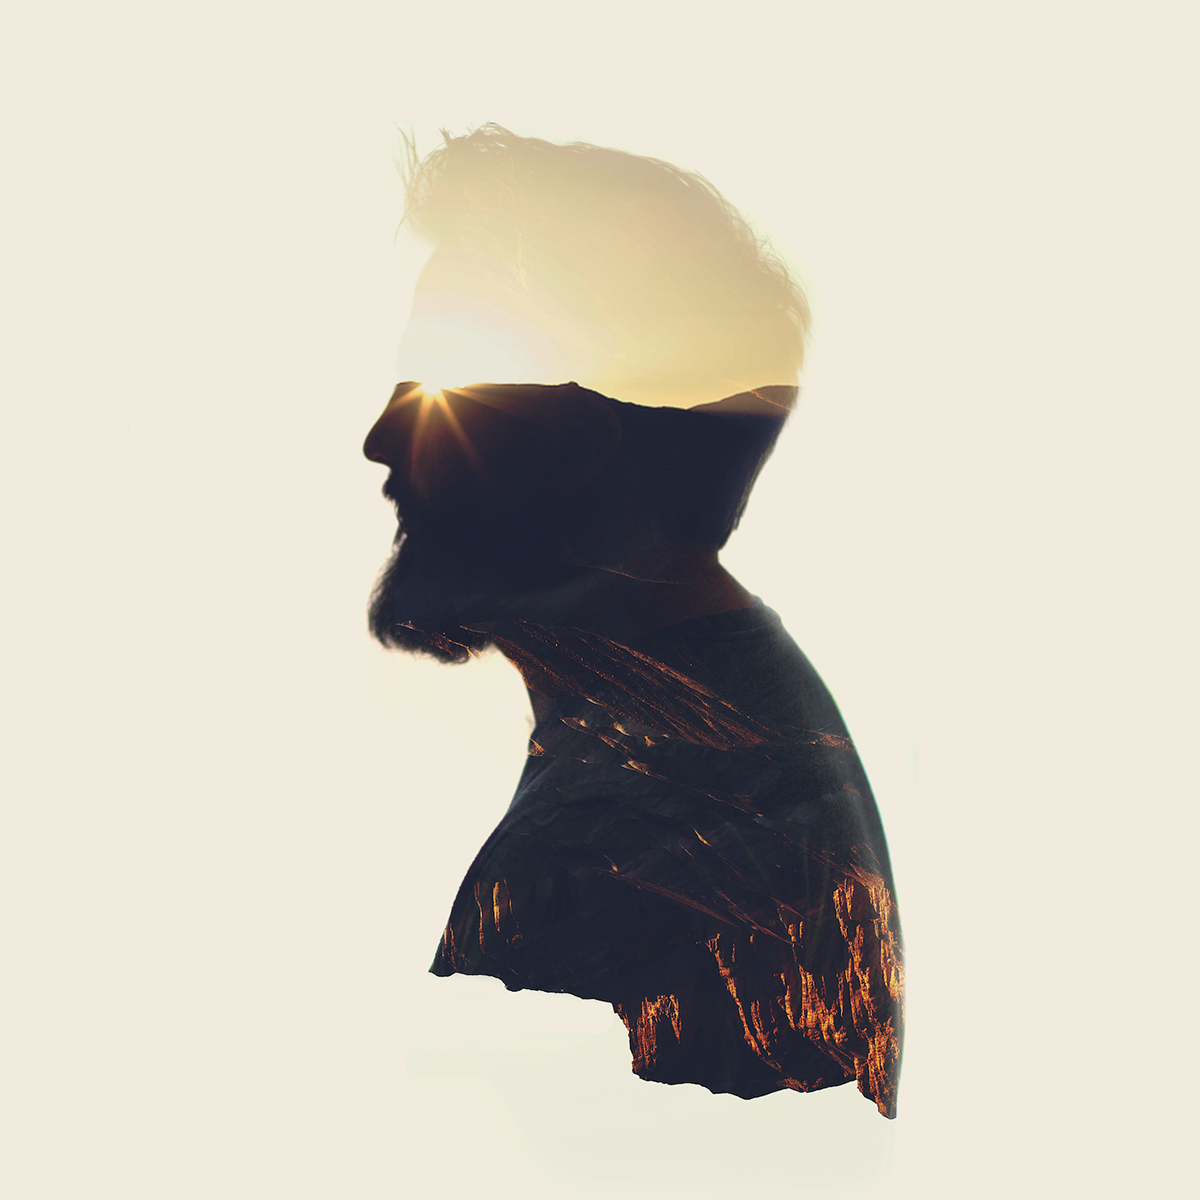 Silhouettes compositing double exposure